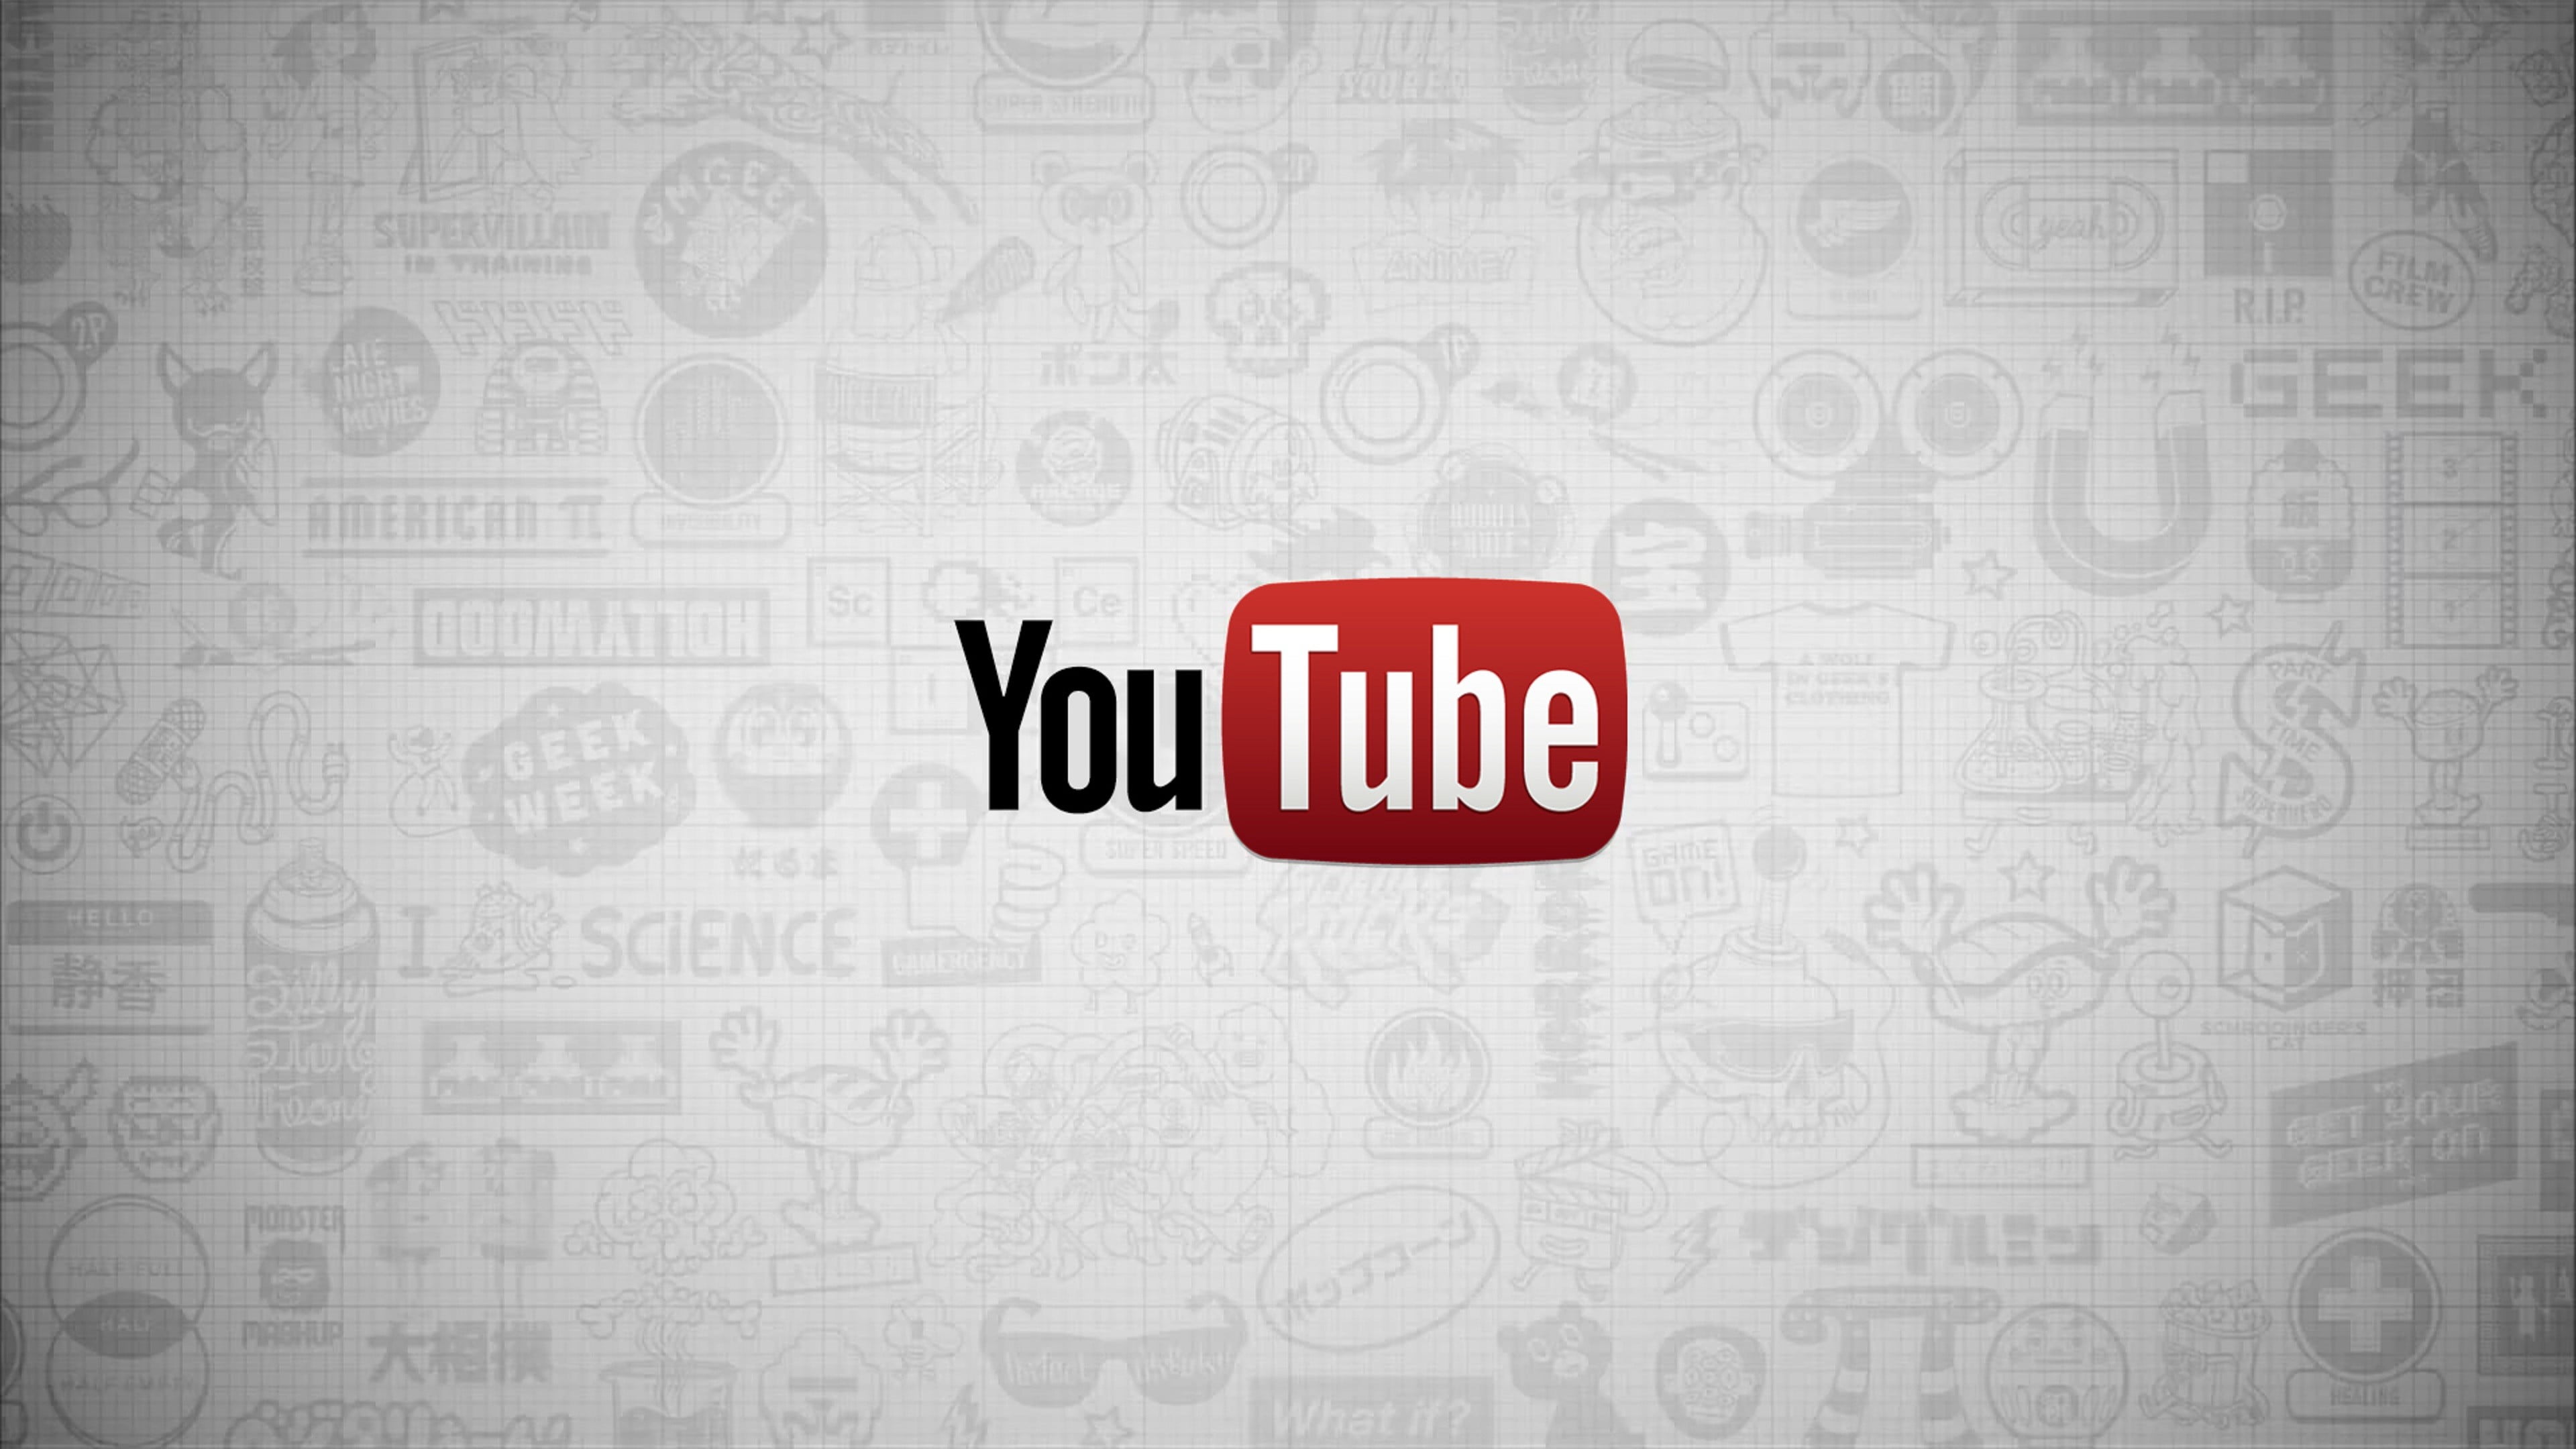 YouTube logo, geek, science, backgrounds, business, symbol, technology